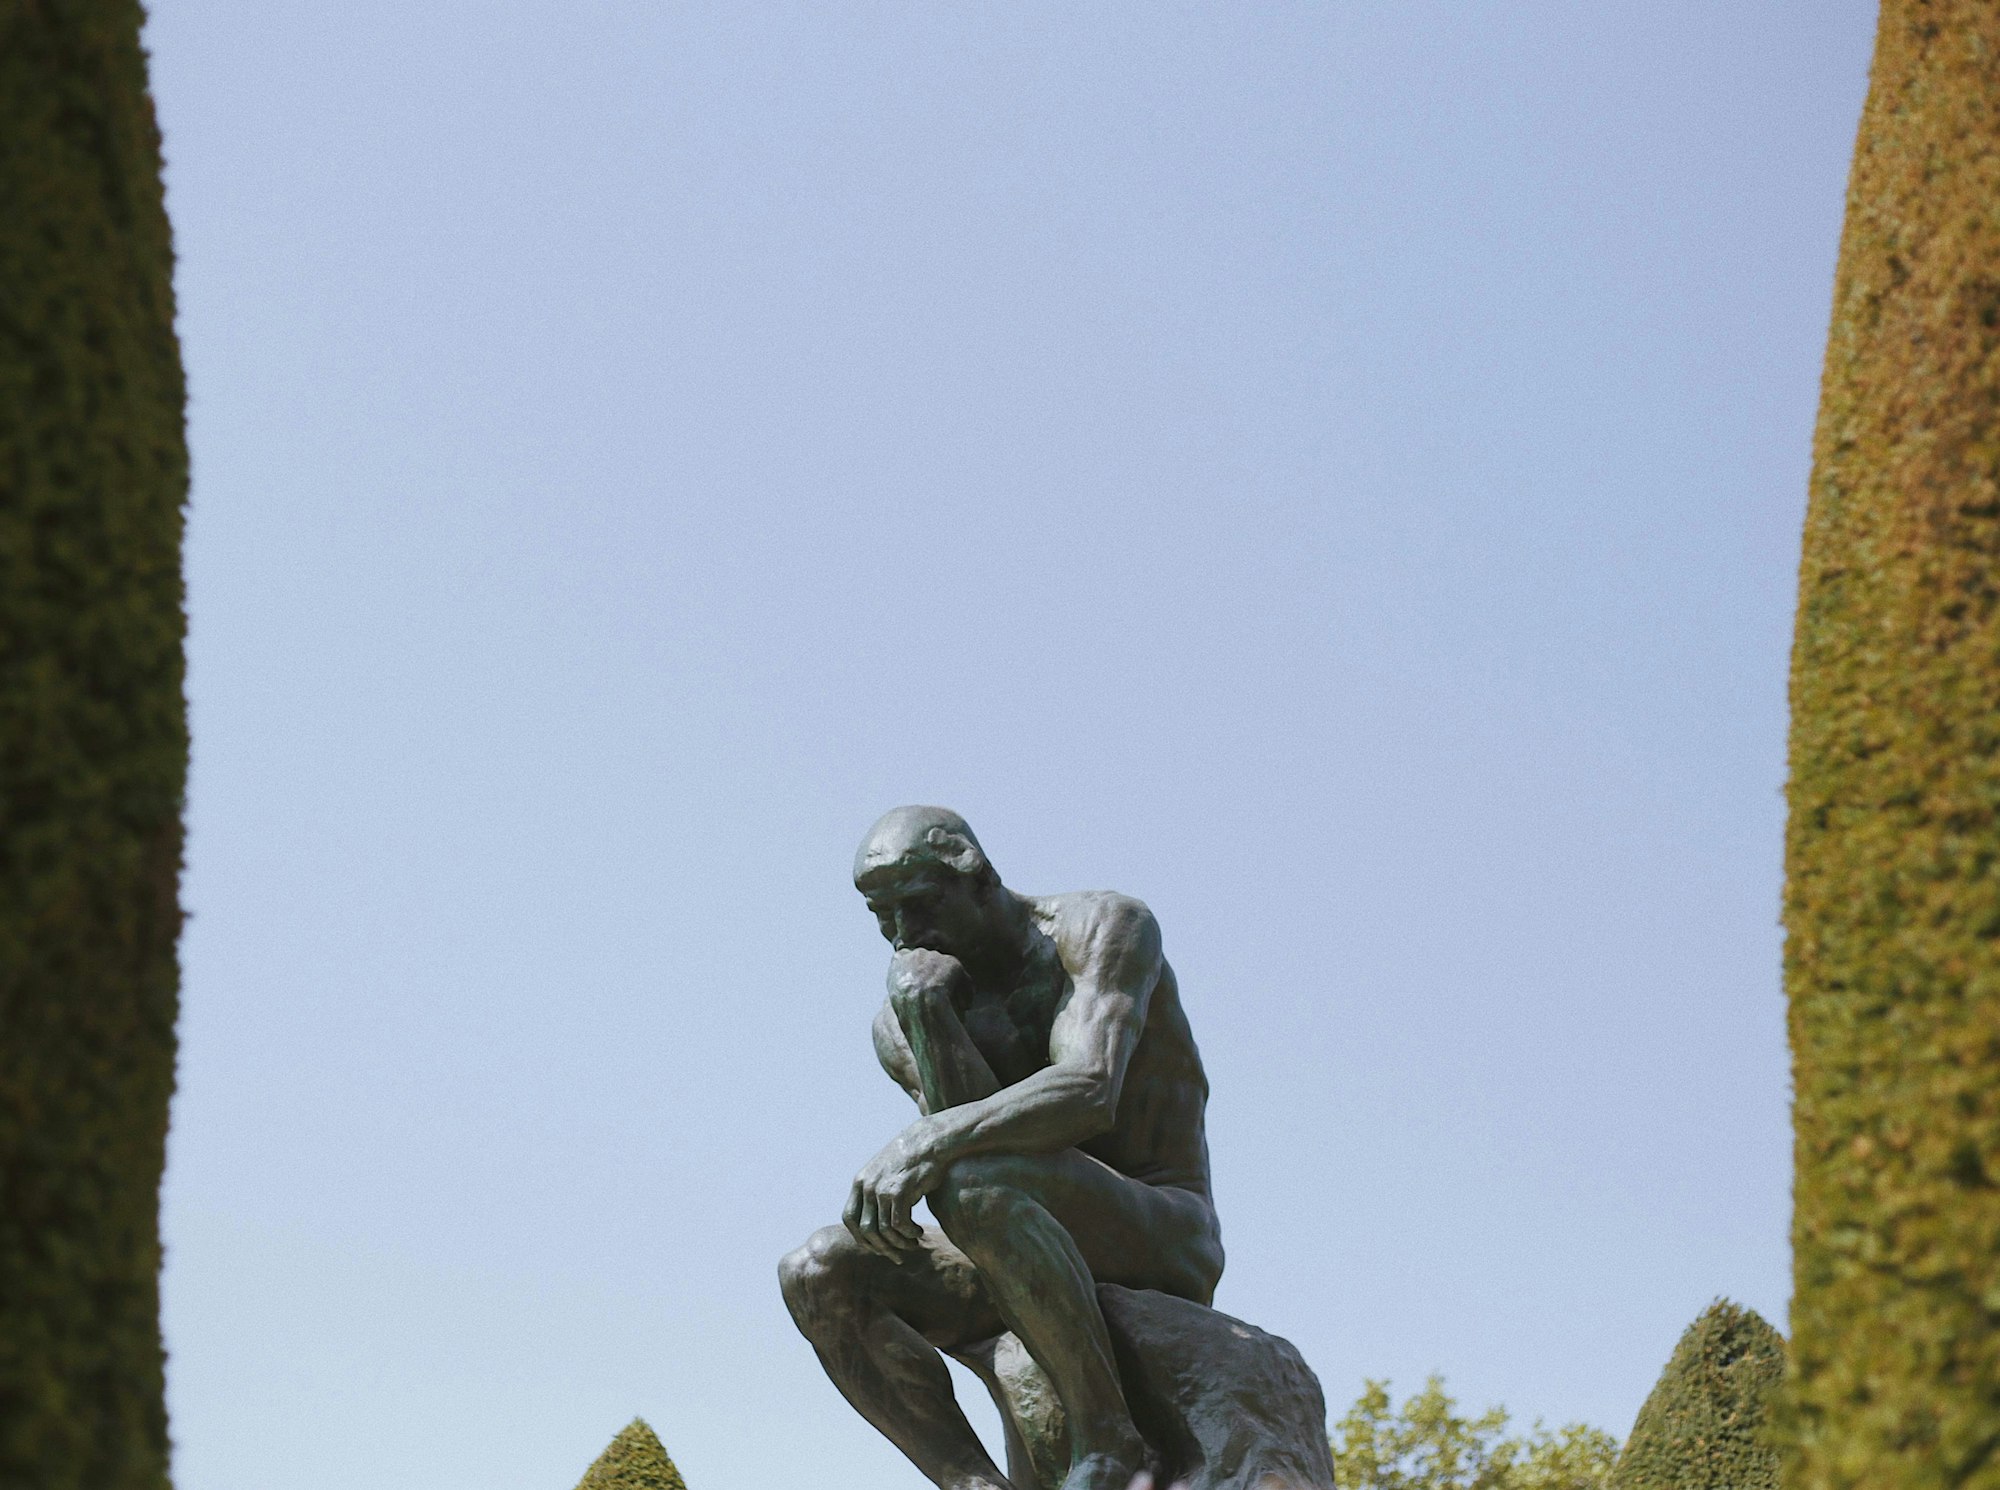 The Thinker statue.